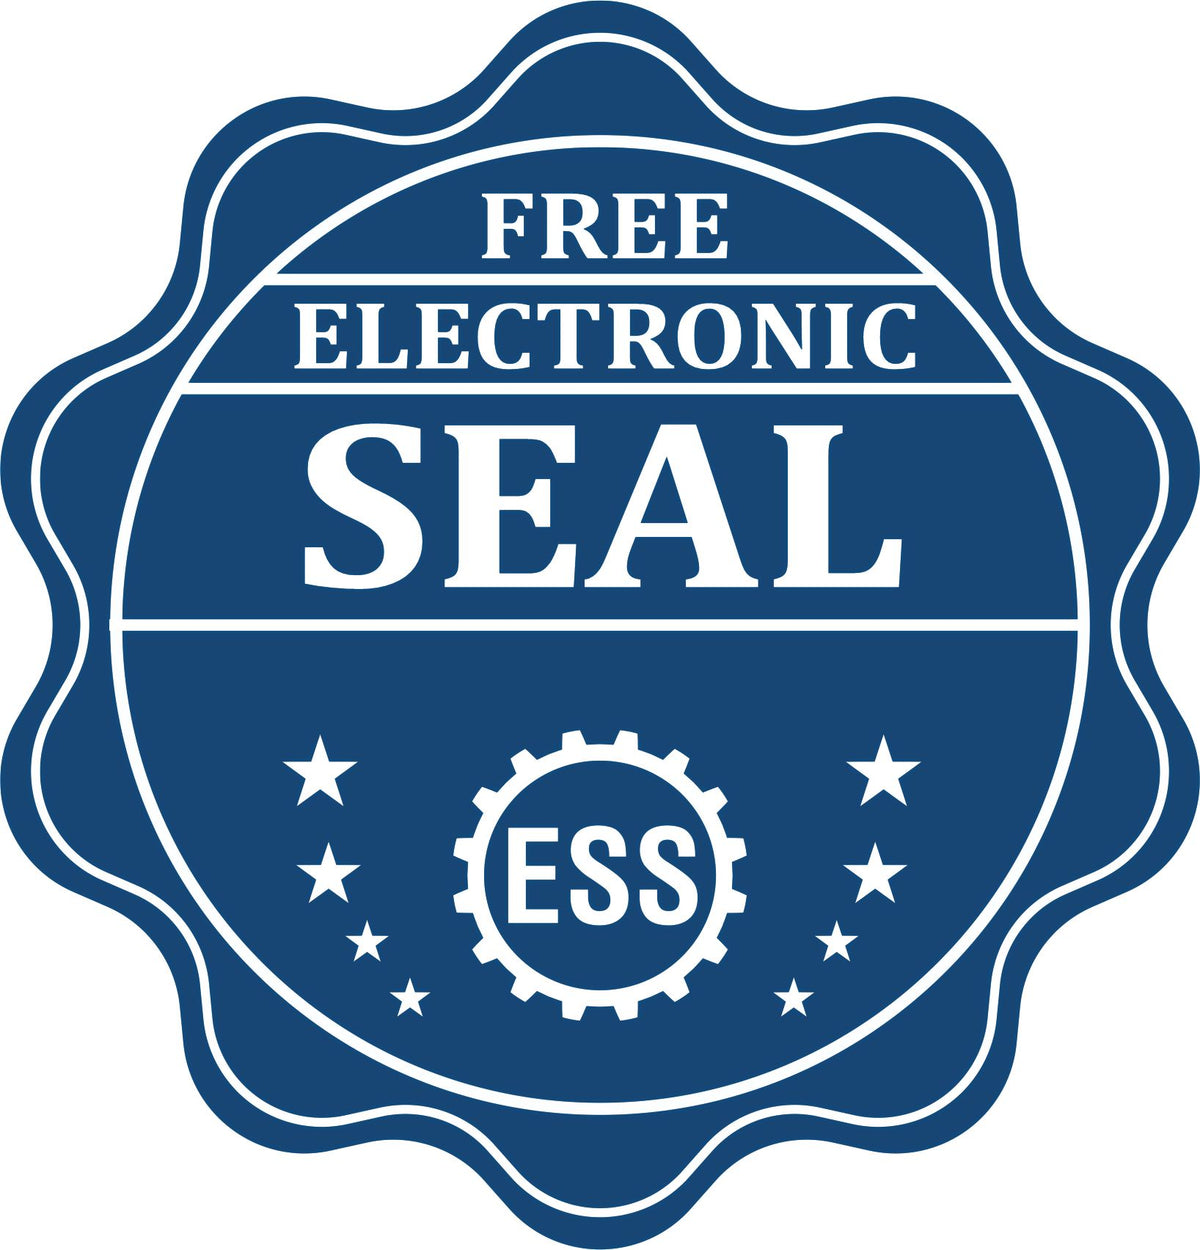 A badge showing a free electronic seal for the Premium MaxLight Pre-Inked South Carolina Landscape Architectural Stamp with stars and the ESS gear on the emblem.